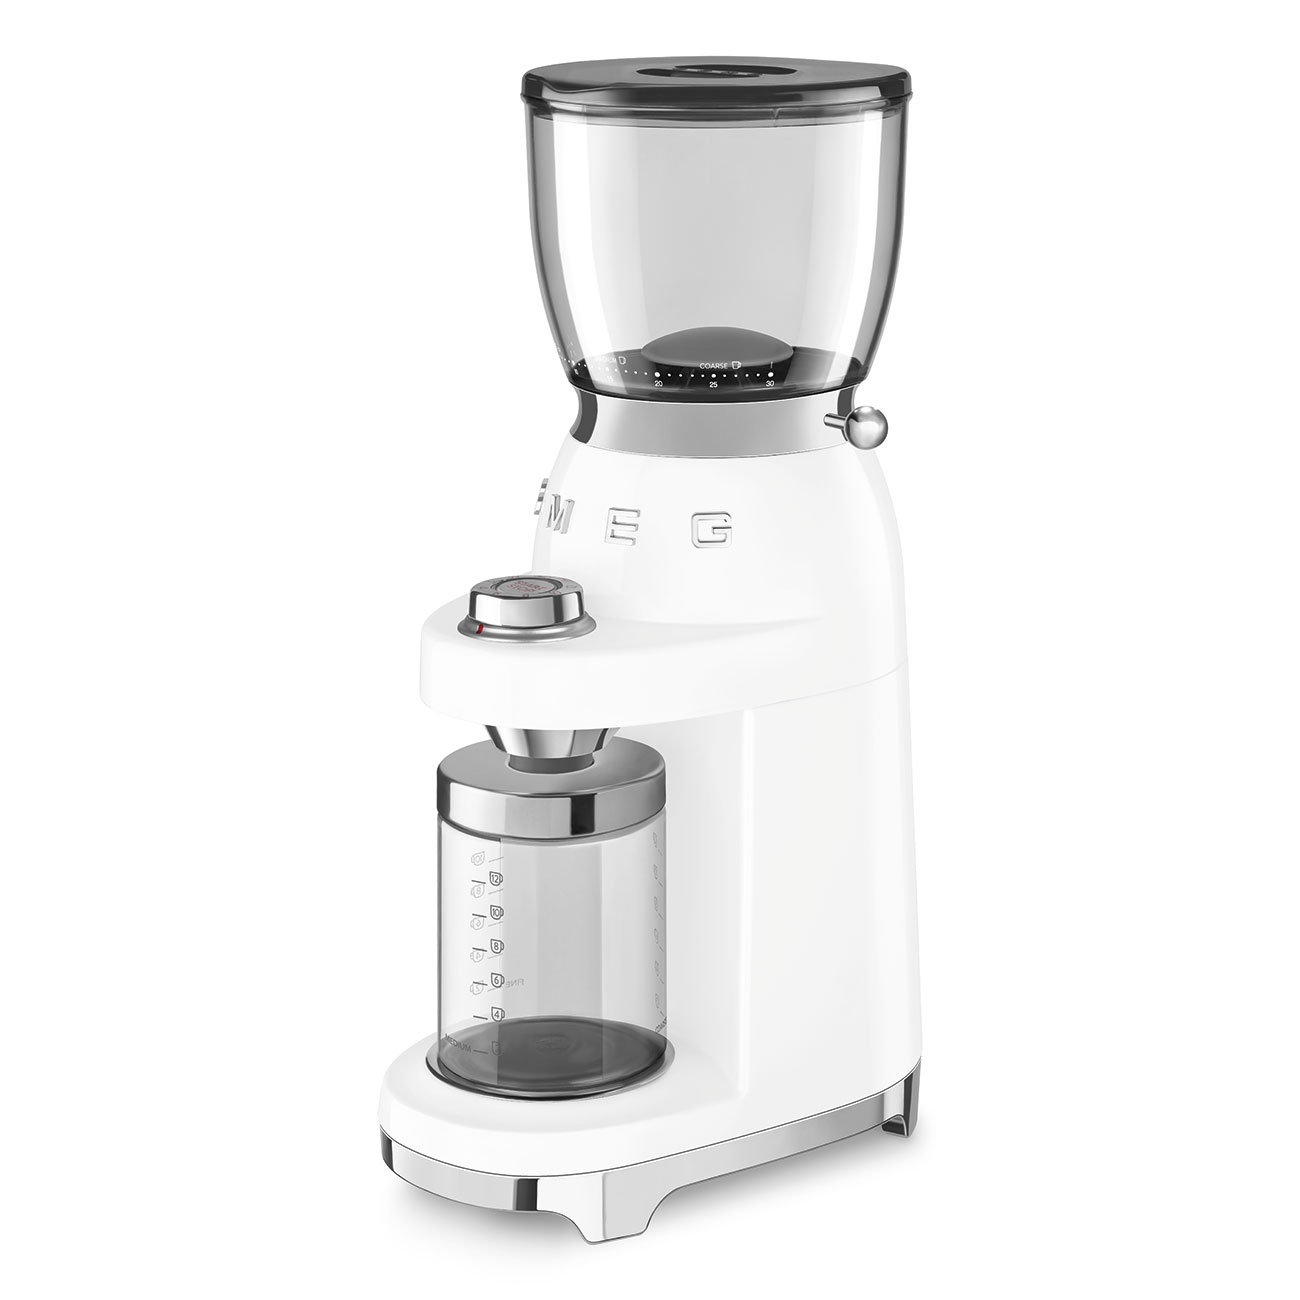 White Coffee Grinder featuring a conical burr - CGF01WHUK - Smeg_5